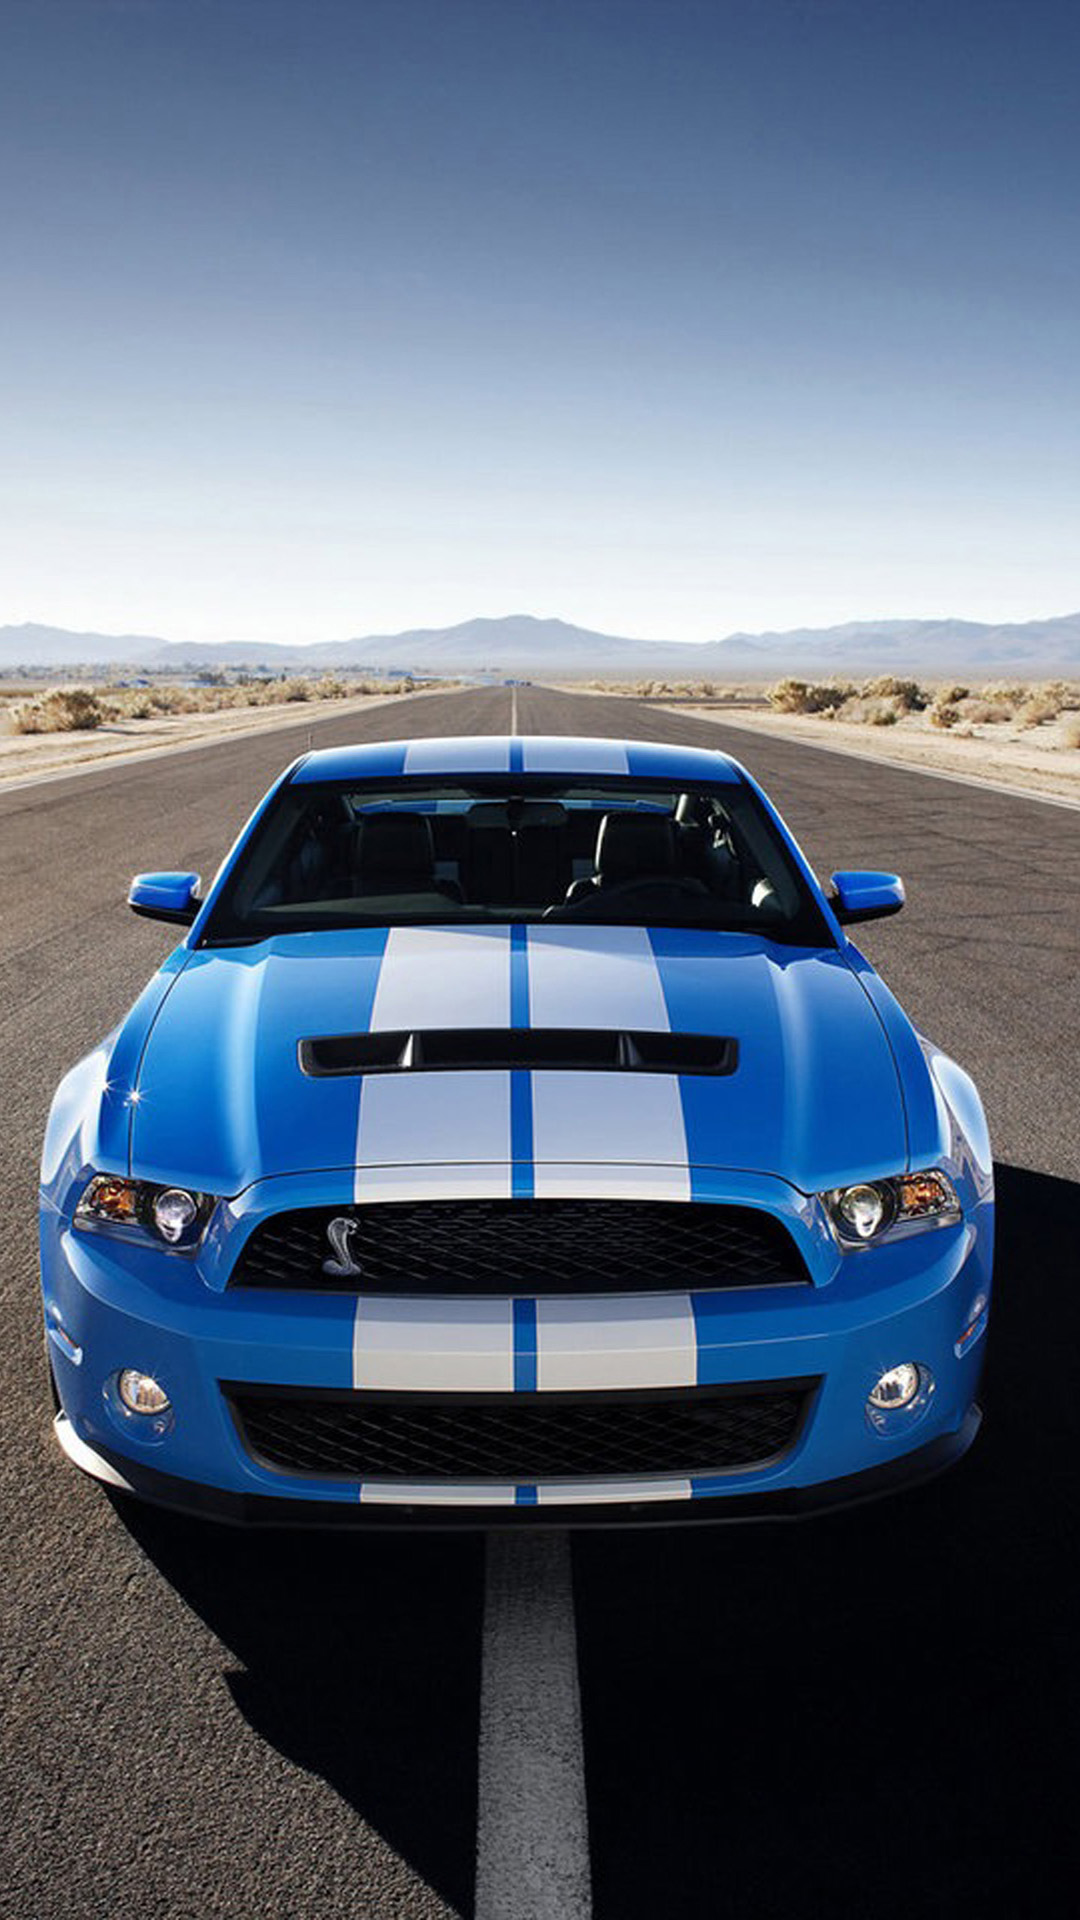 Ford Mustang Shelby Gt 500 - HD Wallpaper 